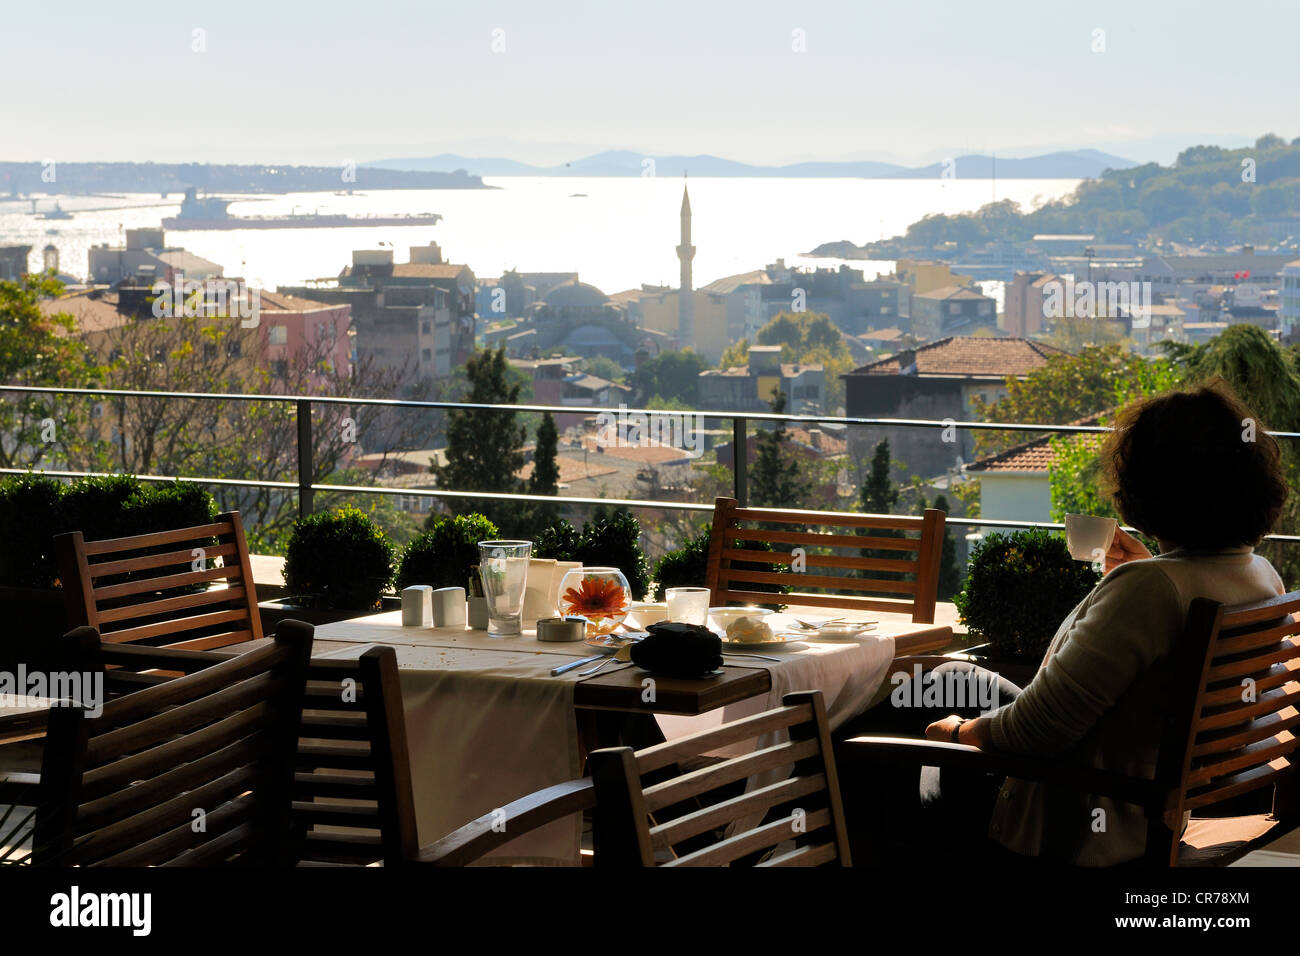 Turkey, Istanbul, Beyoglu District, view on the Bosphorus Strait from Tomtom Suites Hotel Stock Photo